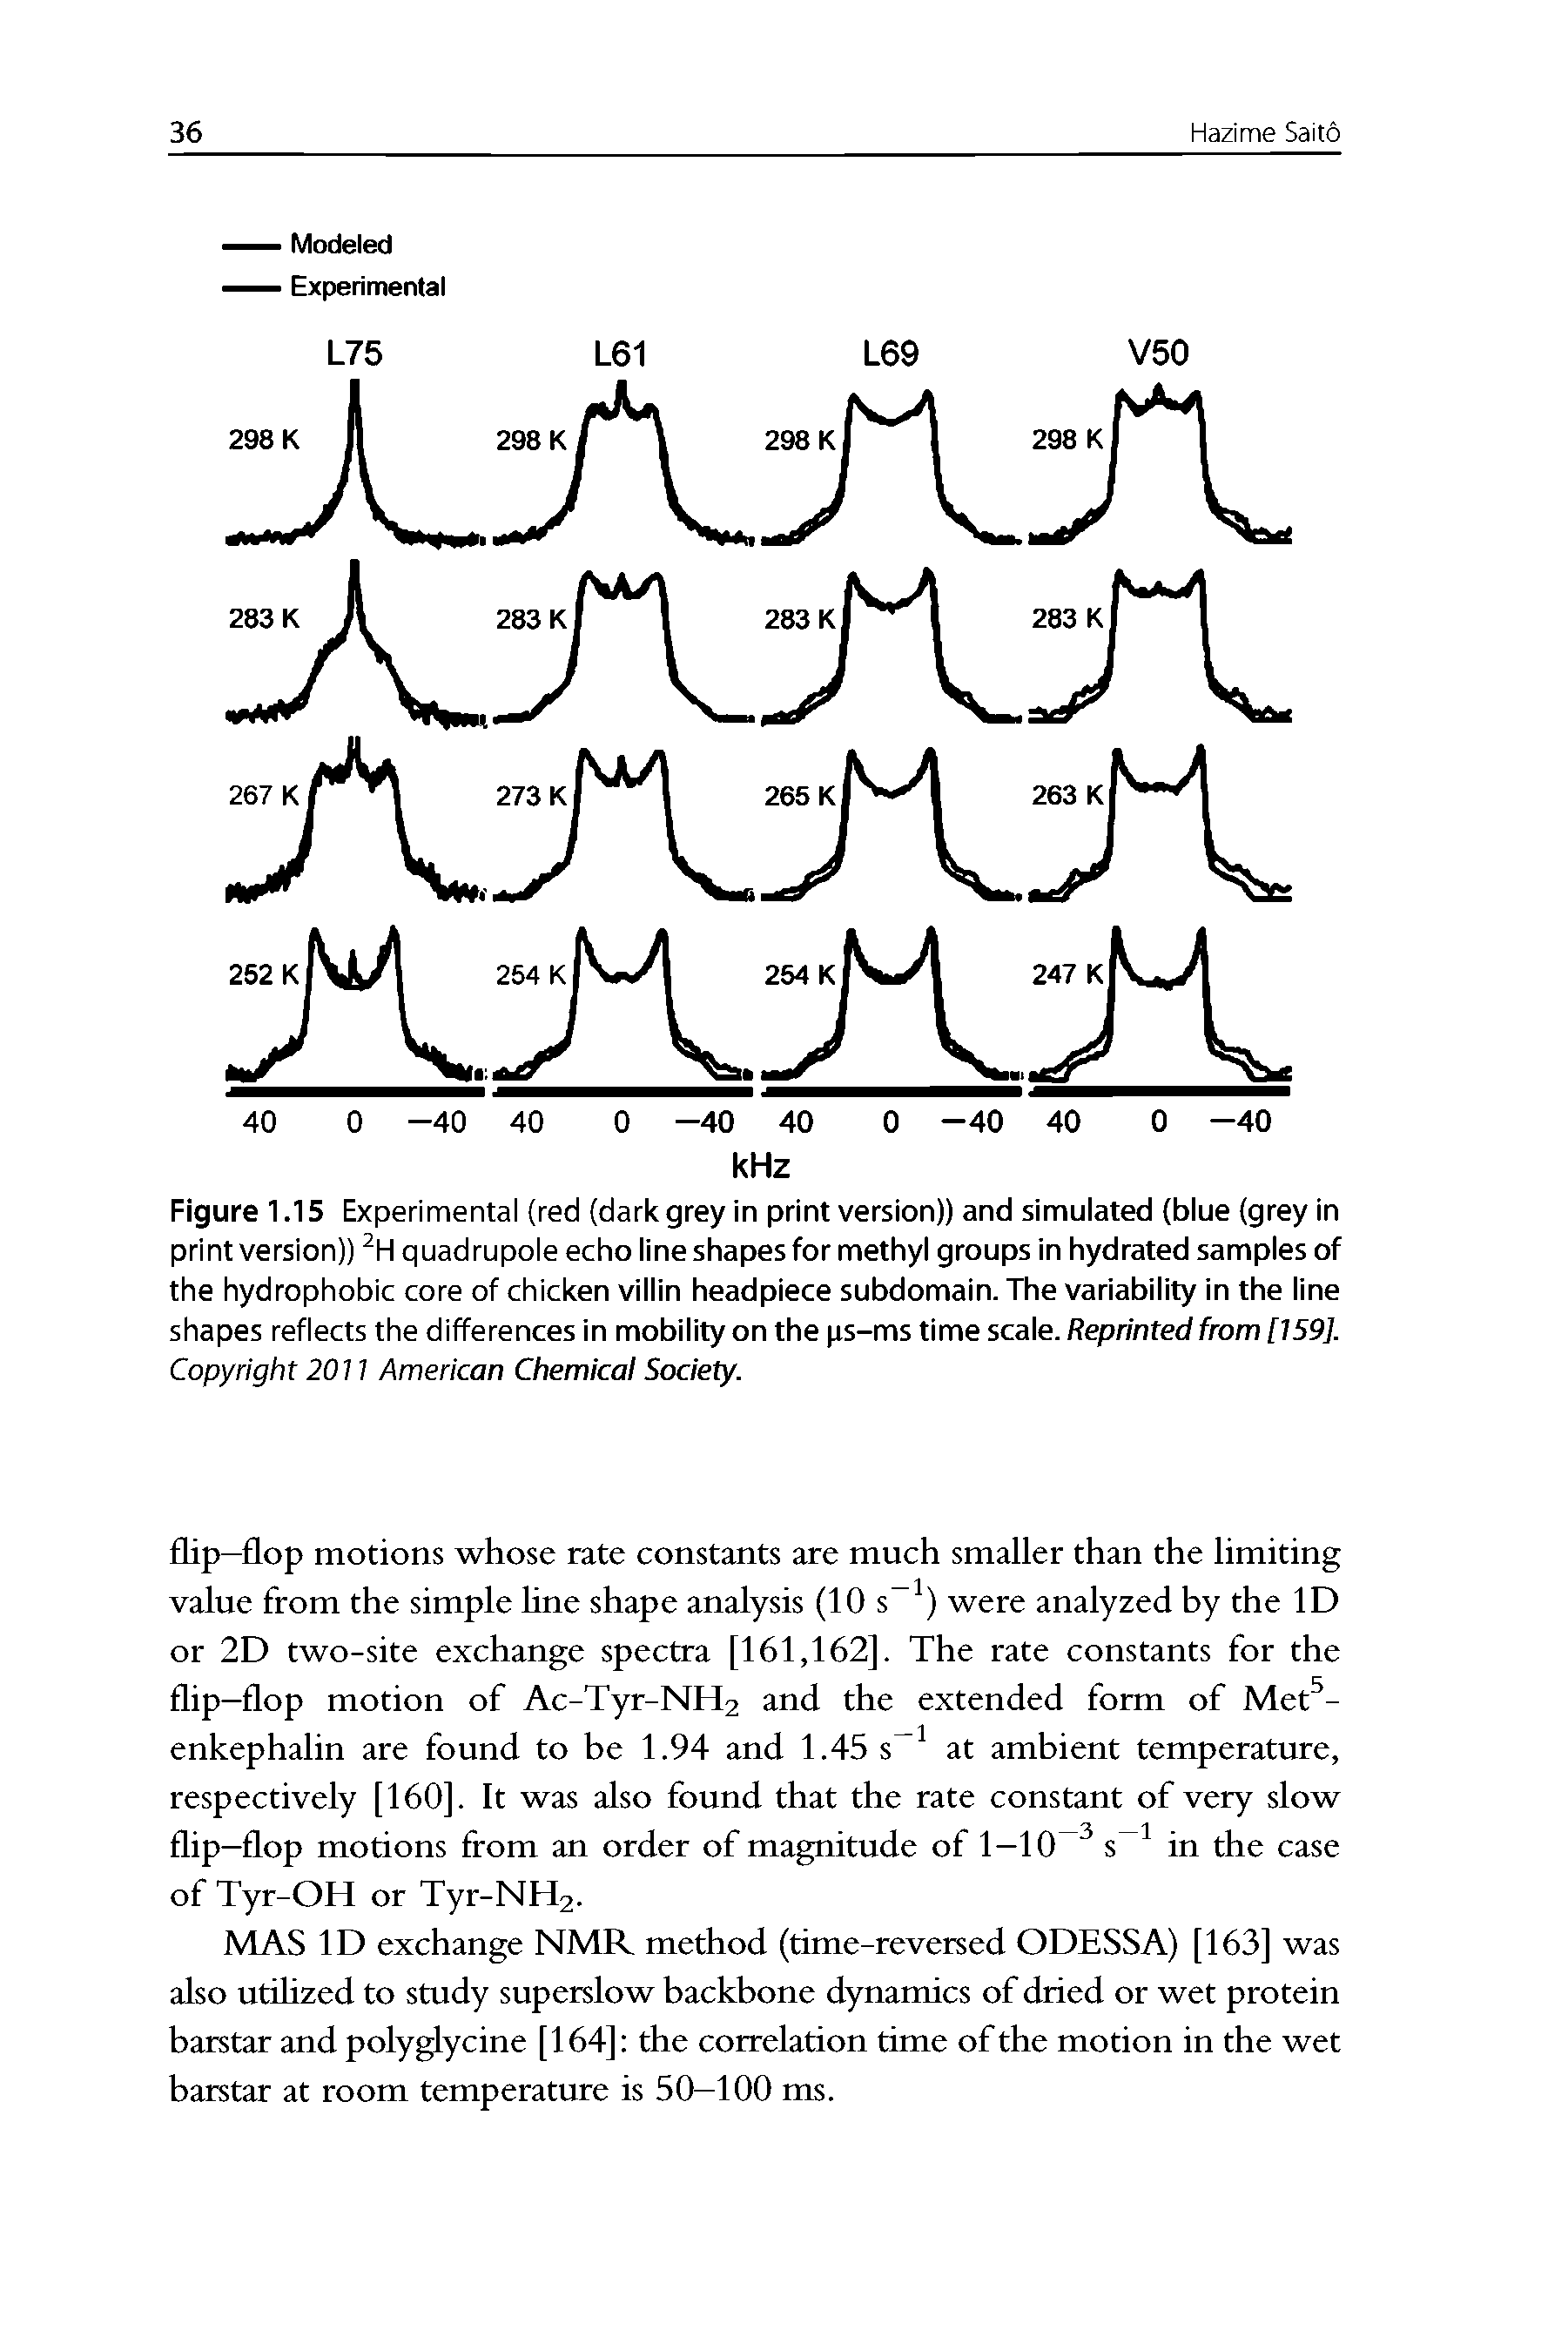 Figure 1.15 Experimental (red (dark grey in print version)) and simuiated (biue (grey in print version)) quadrupole echo line shapes for methyl groups in hydrated samples of the hydrophobic core of chicken villin headpiece subdomain. The variability in the line shapes reflects the differences in mobility on the ps-ms time sca e. Reprinted from [159]. Copyright 2011 American Chemical Society.